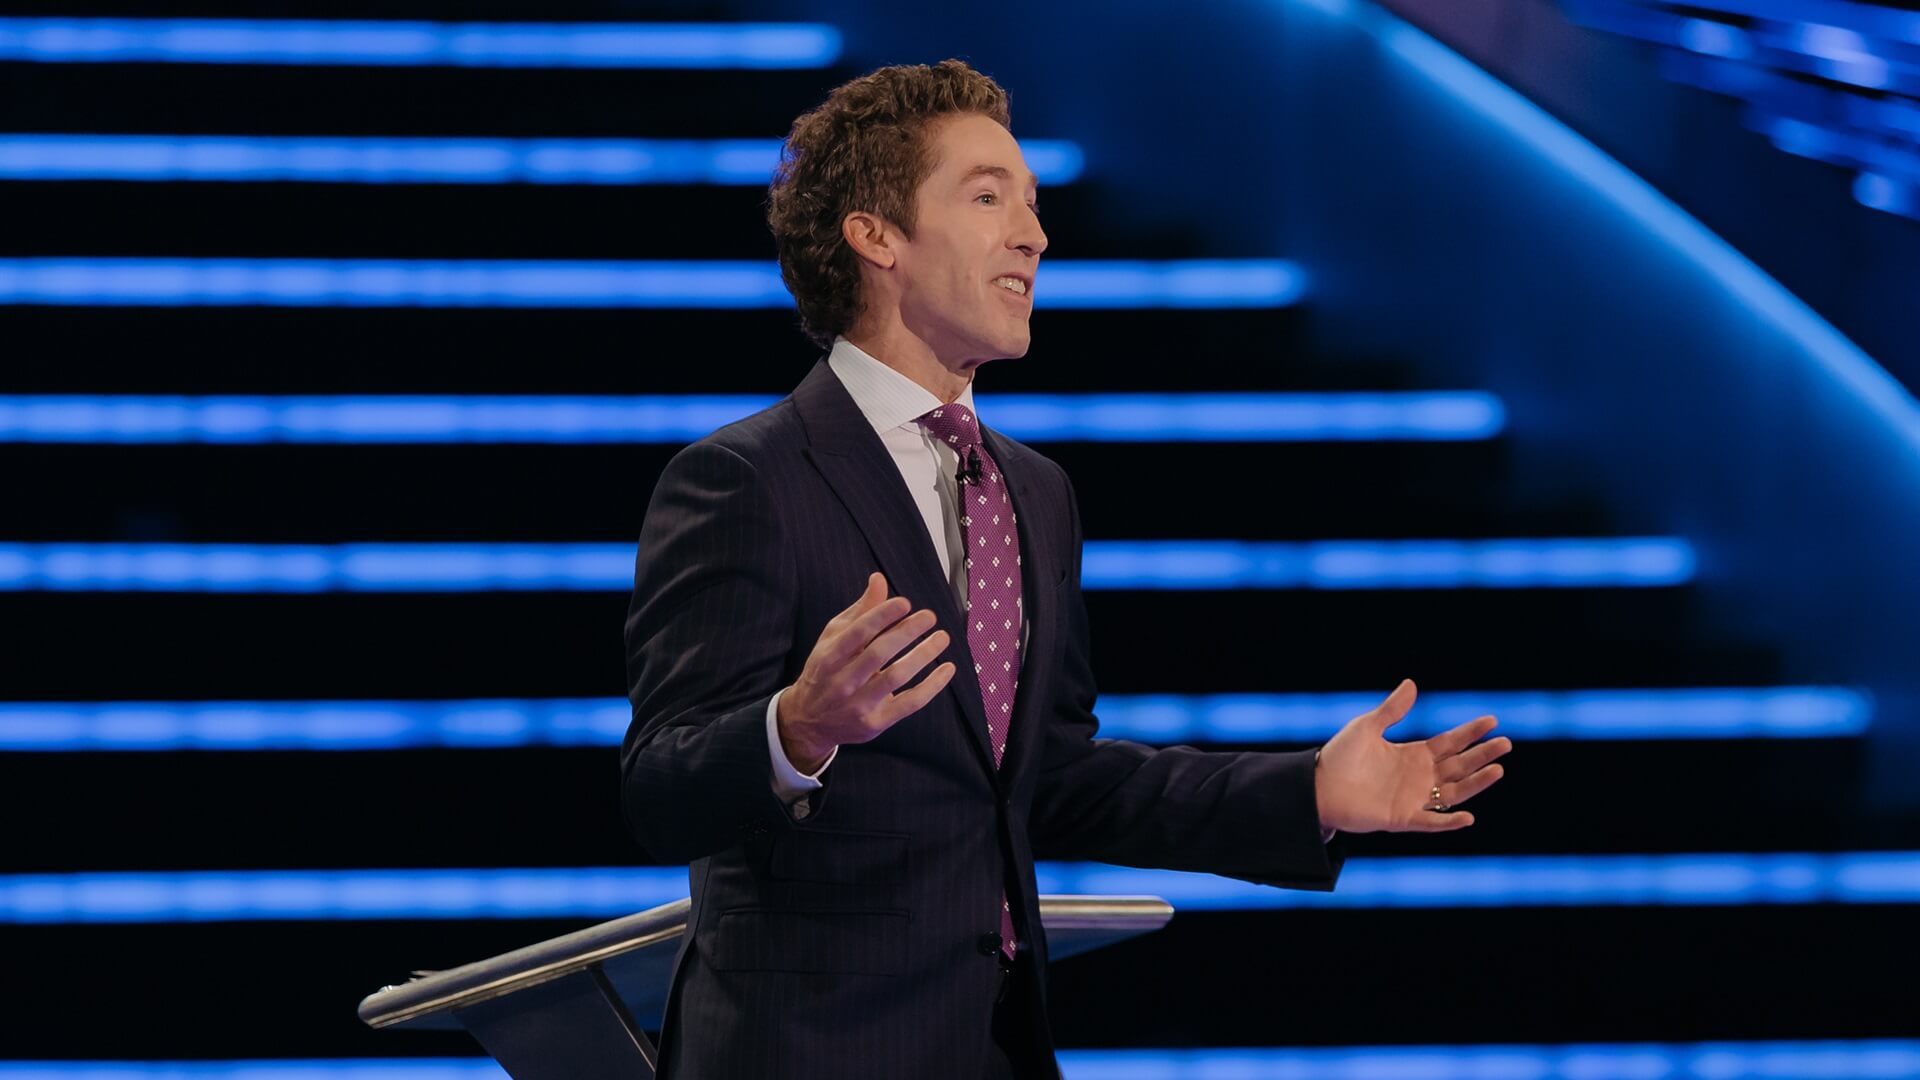 Joel Osteen speaking on Bless Yourself at Lakewood Church